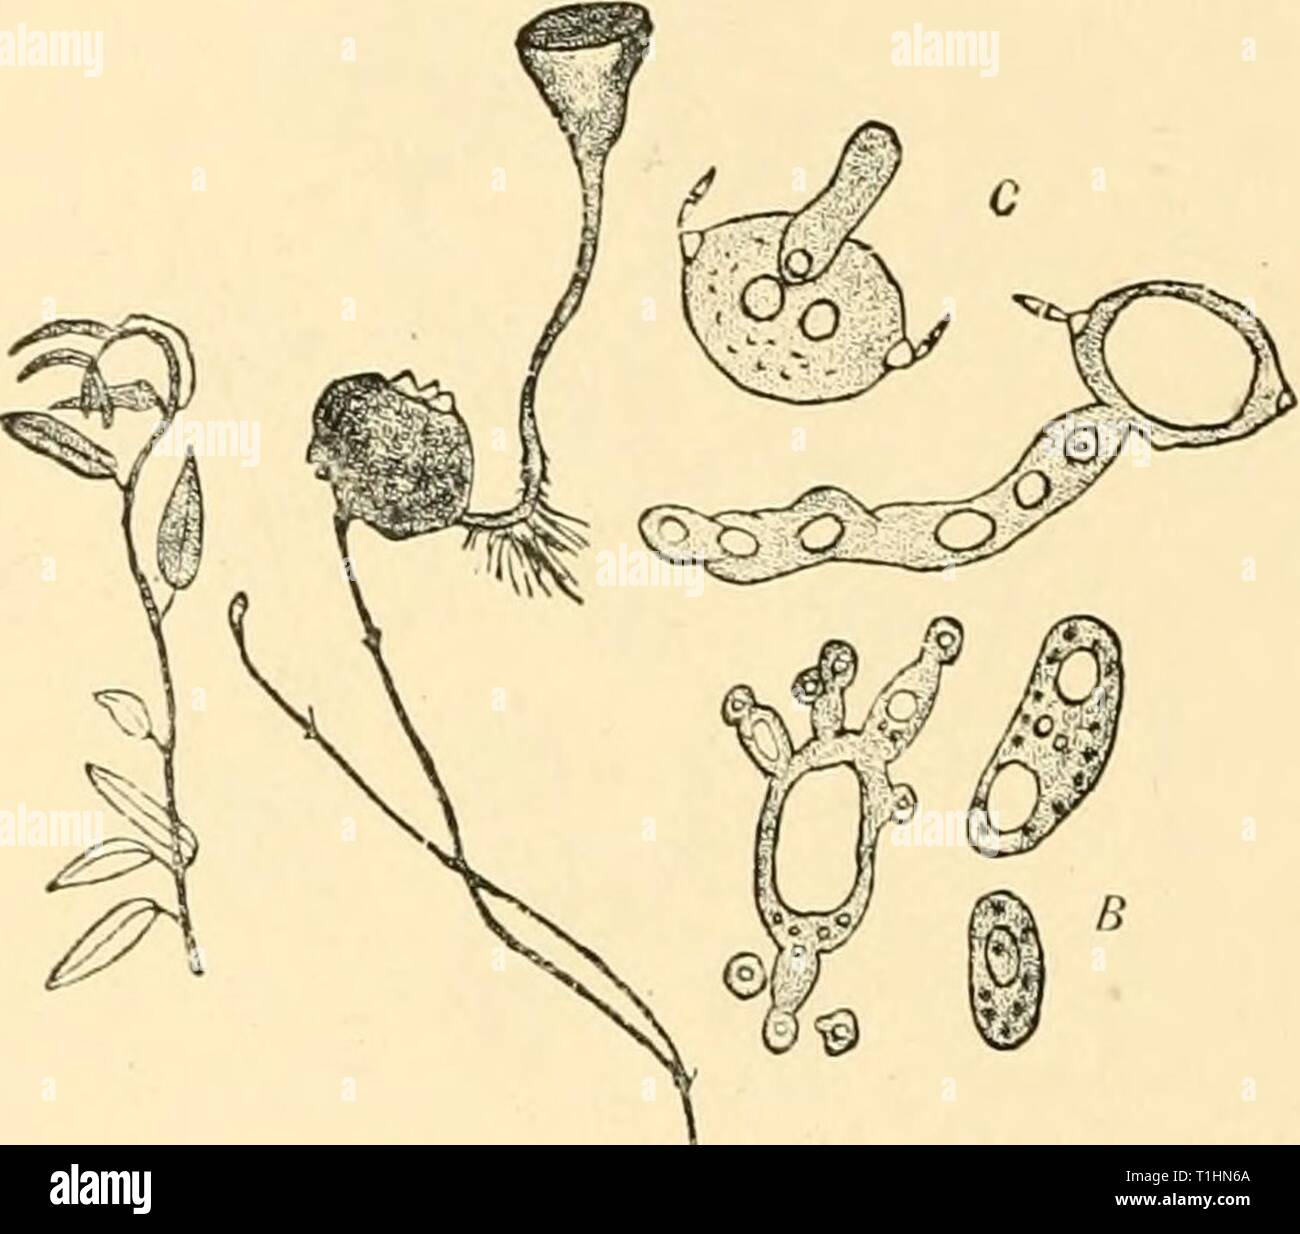 Diseases of plants induced by Diseases of plants induced by cryptogamic parasites; introduction to the study of pathogenic Fungi, slime-Fungi, bacteria, & Algae  diseasesofplants00tube Year: 1897  258 ASCOMYCETES. coniclia germinate and give off long septate hyphae which, follow- ing the course of the pollen-tube, reach the ovary, and soon fill all four loculi with a white mycelium. The growth of this mycelium proceeds from the central axis towards the walls, and forms a hollow sphere open above and below. The diseased berries cannot be distinguished till ripe; then, whereas the normal are red Stock Photo